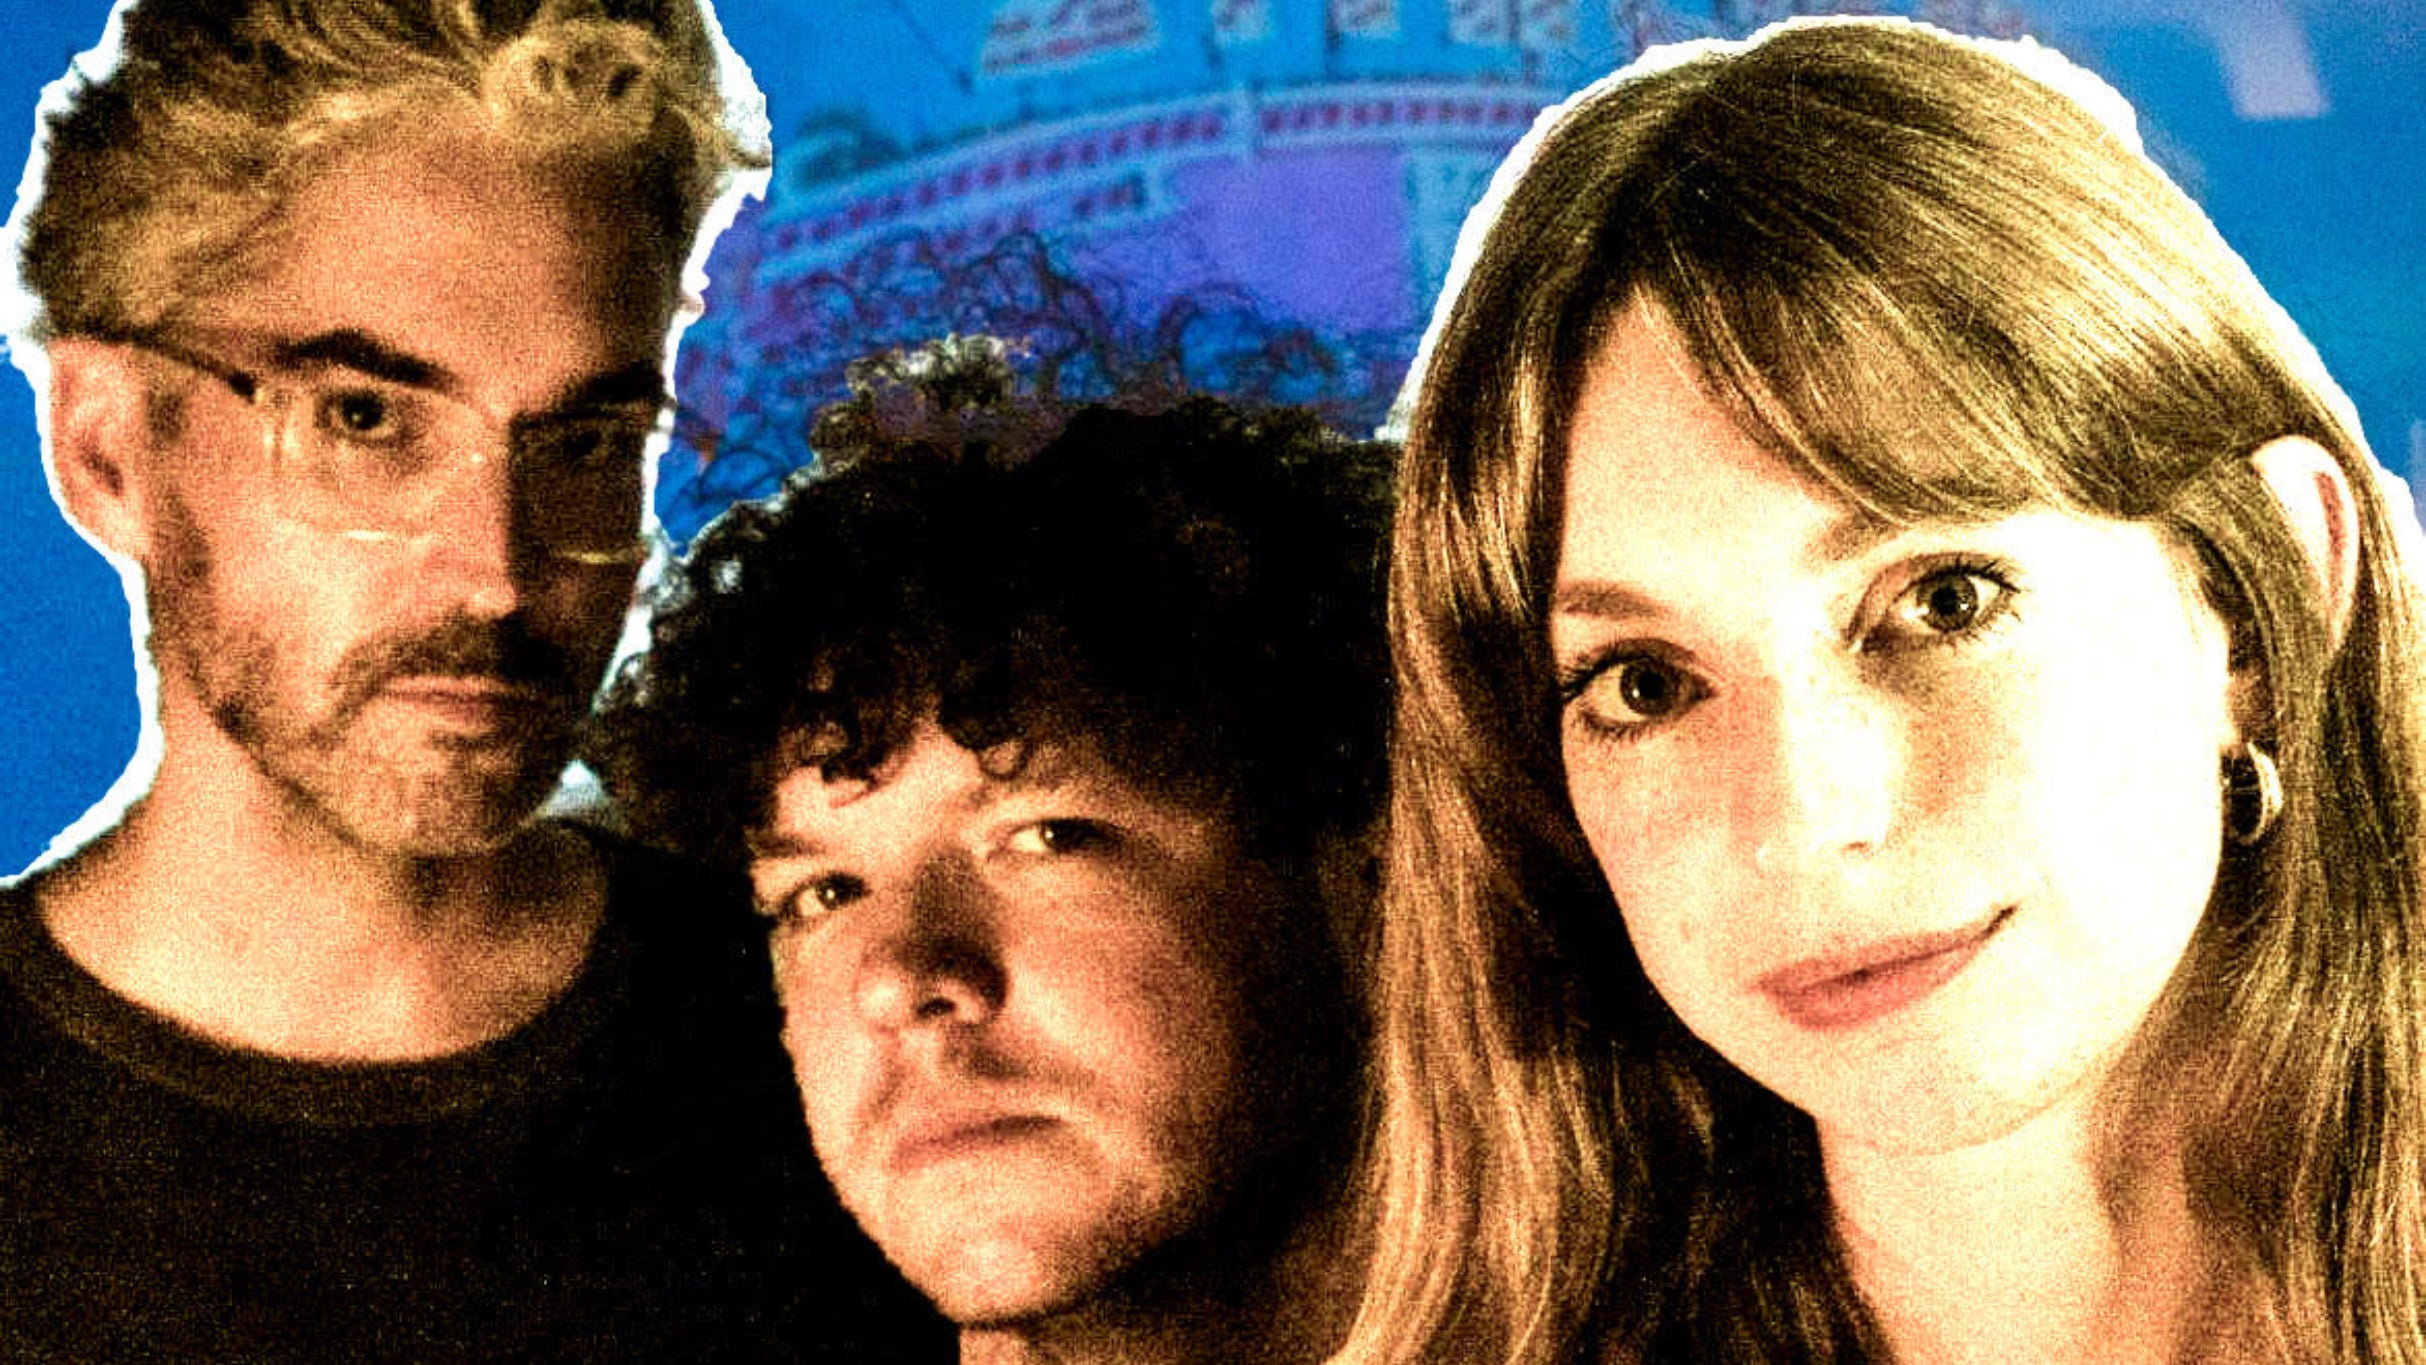 Ringo Deathstarr free presale password for early tickets in Los Angeles